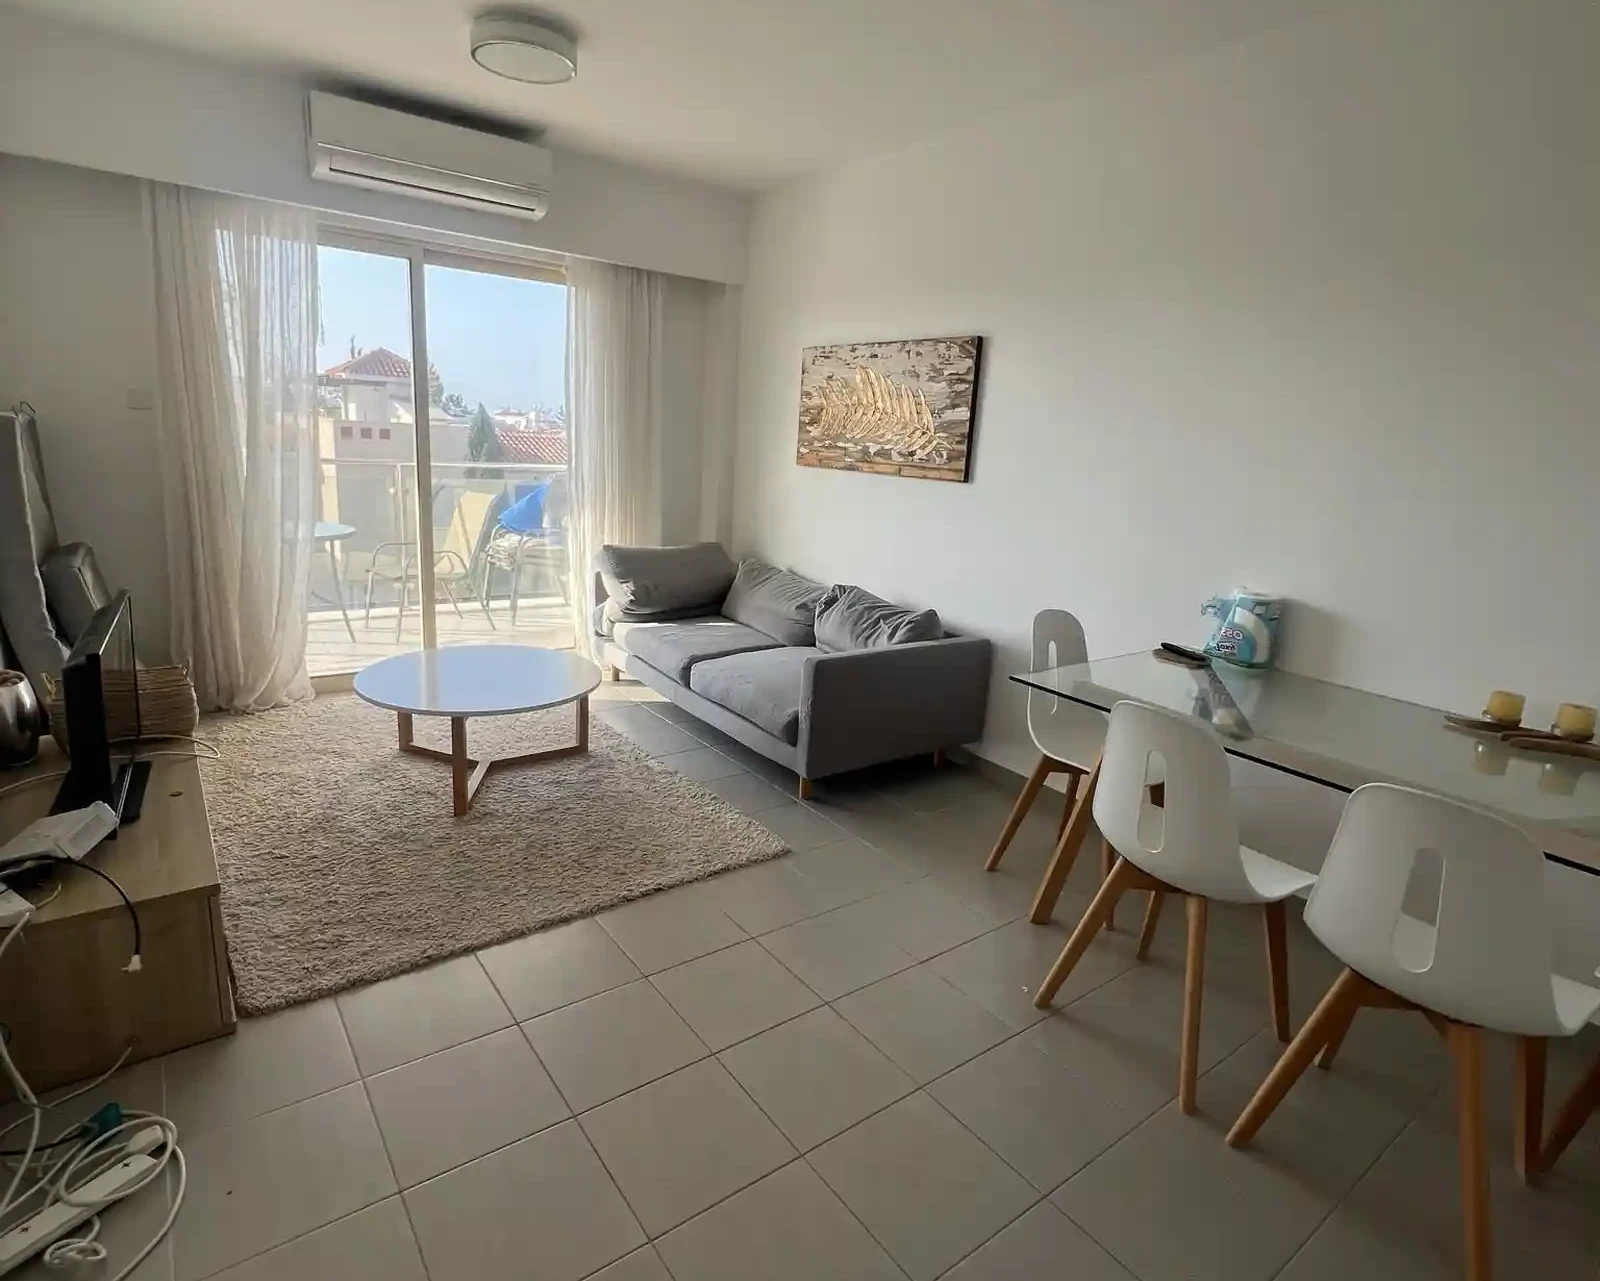 2-bedroom apartment to rent €2.000, image 1